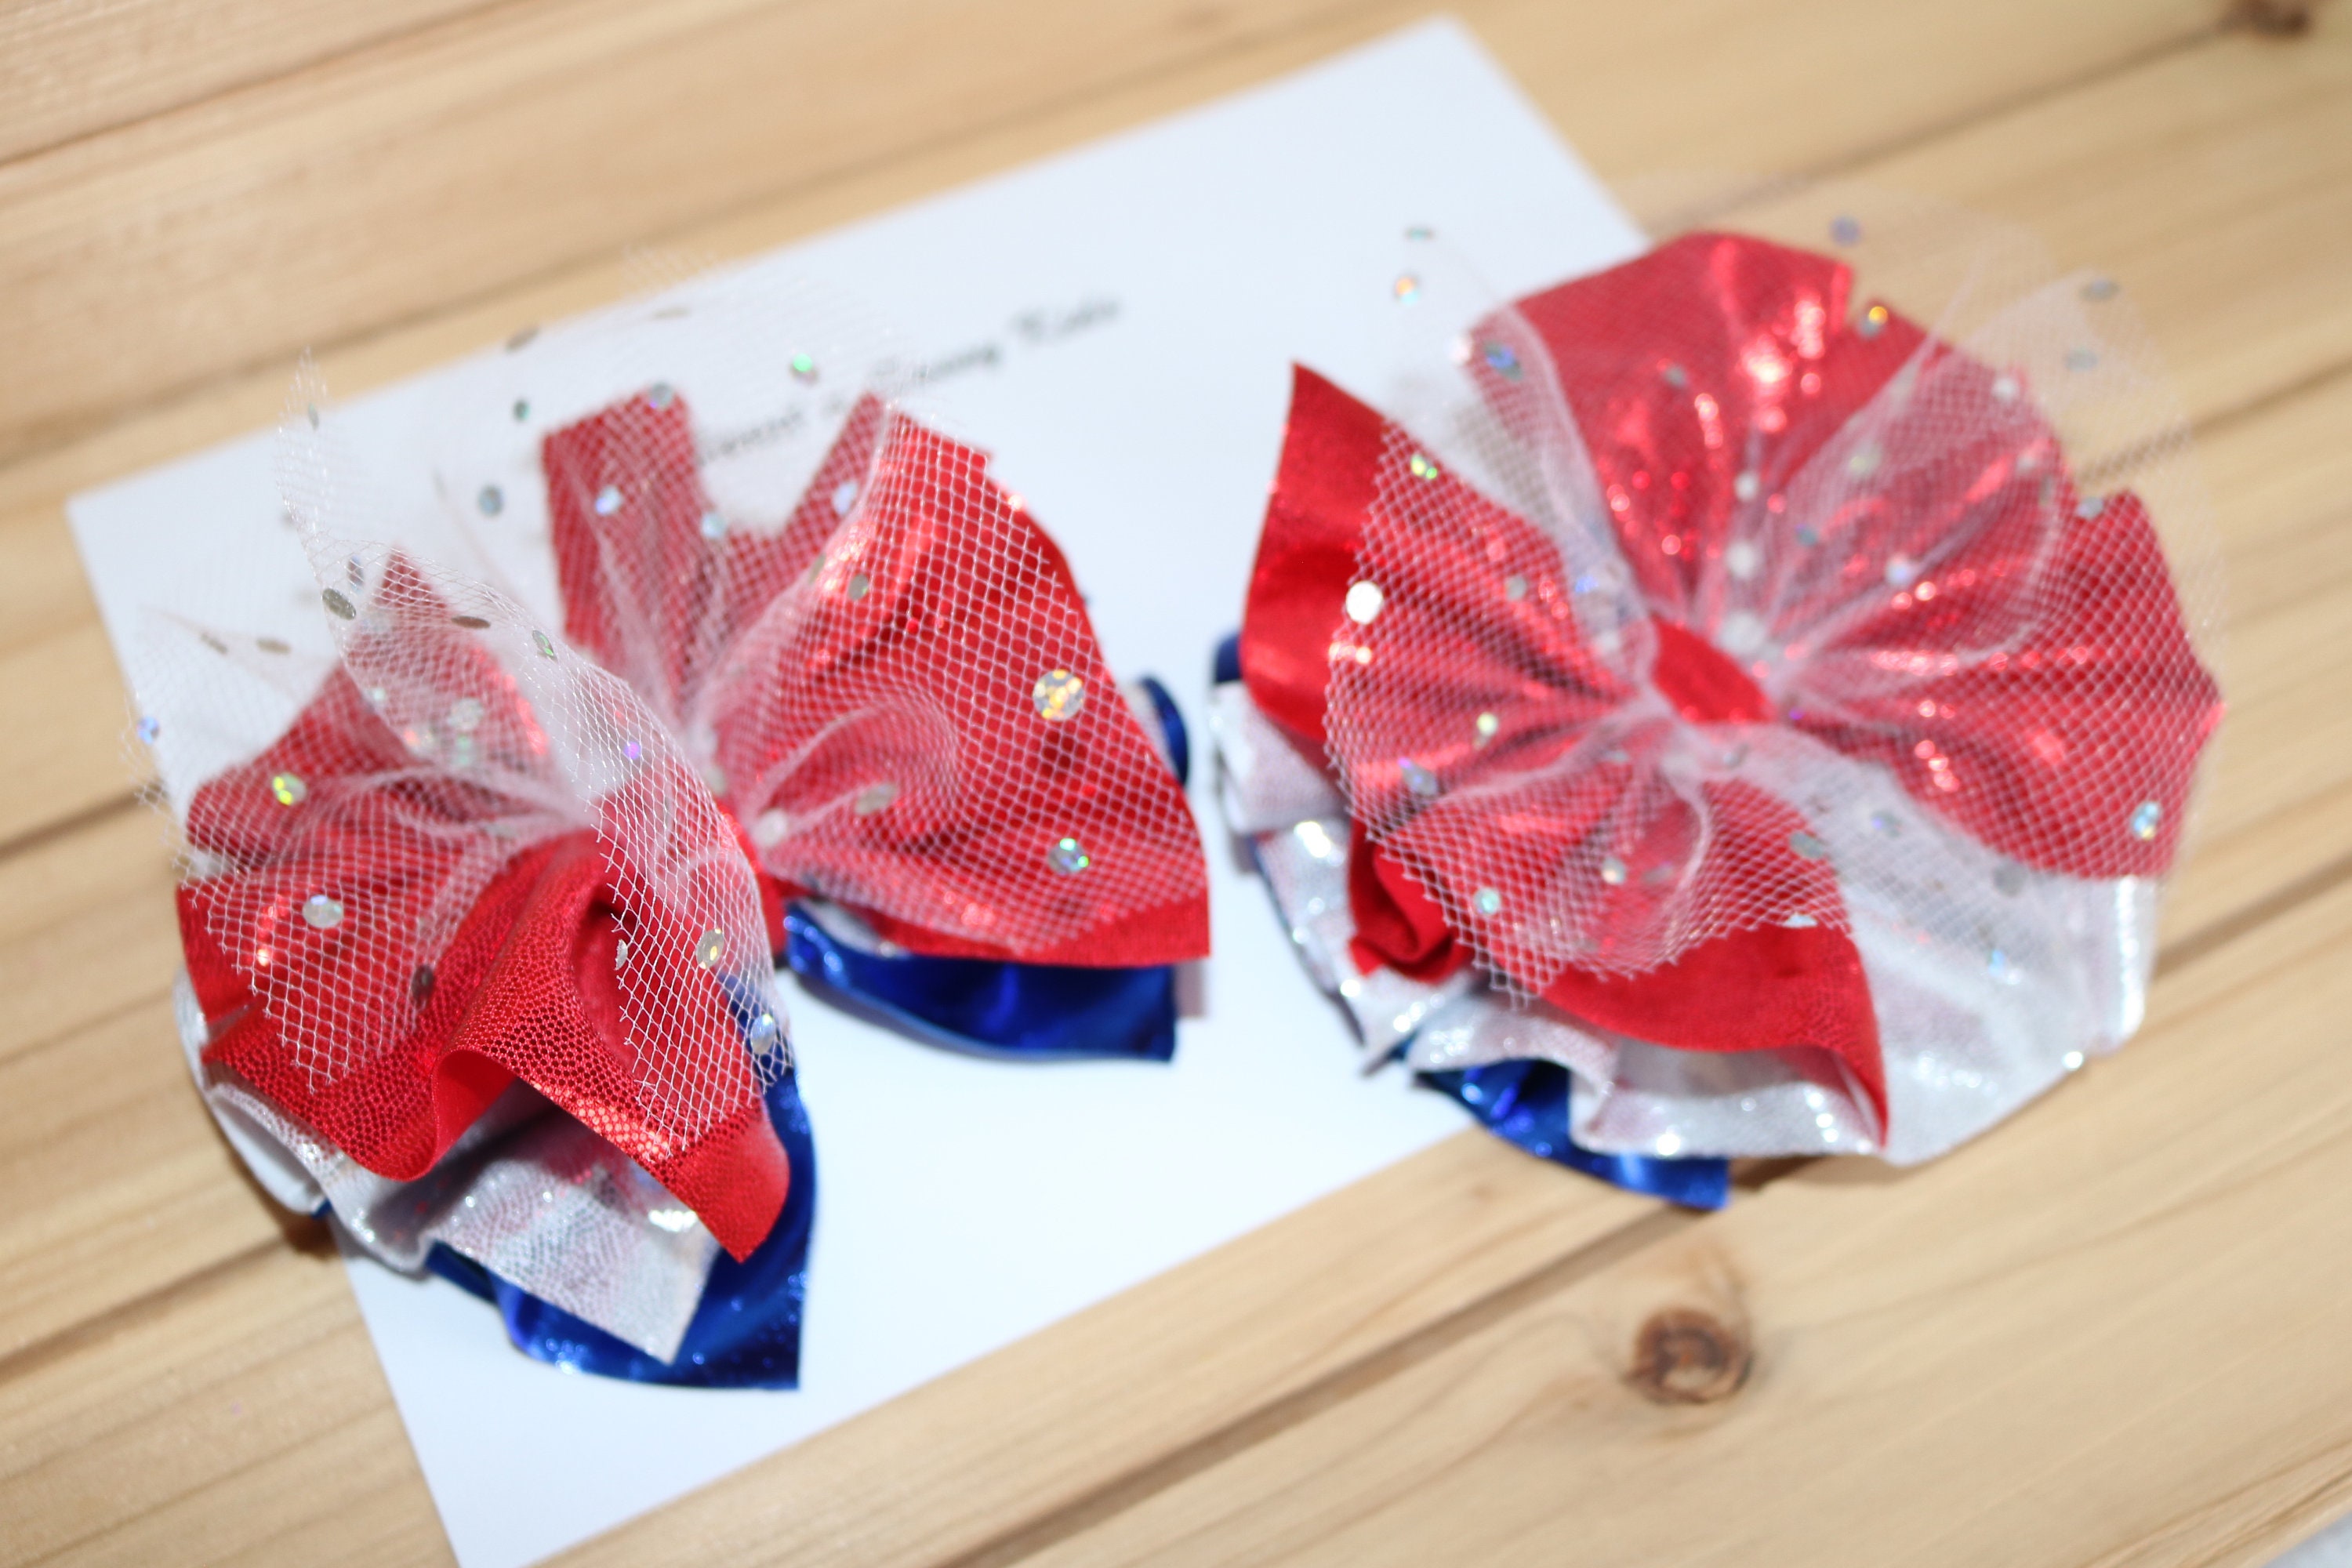 Gift Package Bows, Small Set of Red Christmas Bows, Red Velvet Bow,  Christmas Small Bows, Wreath Embellishments, Lantern Bows